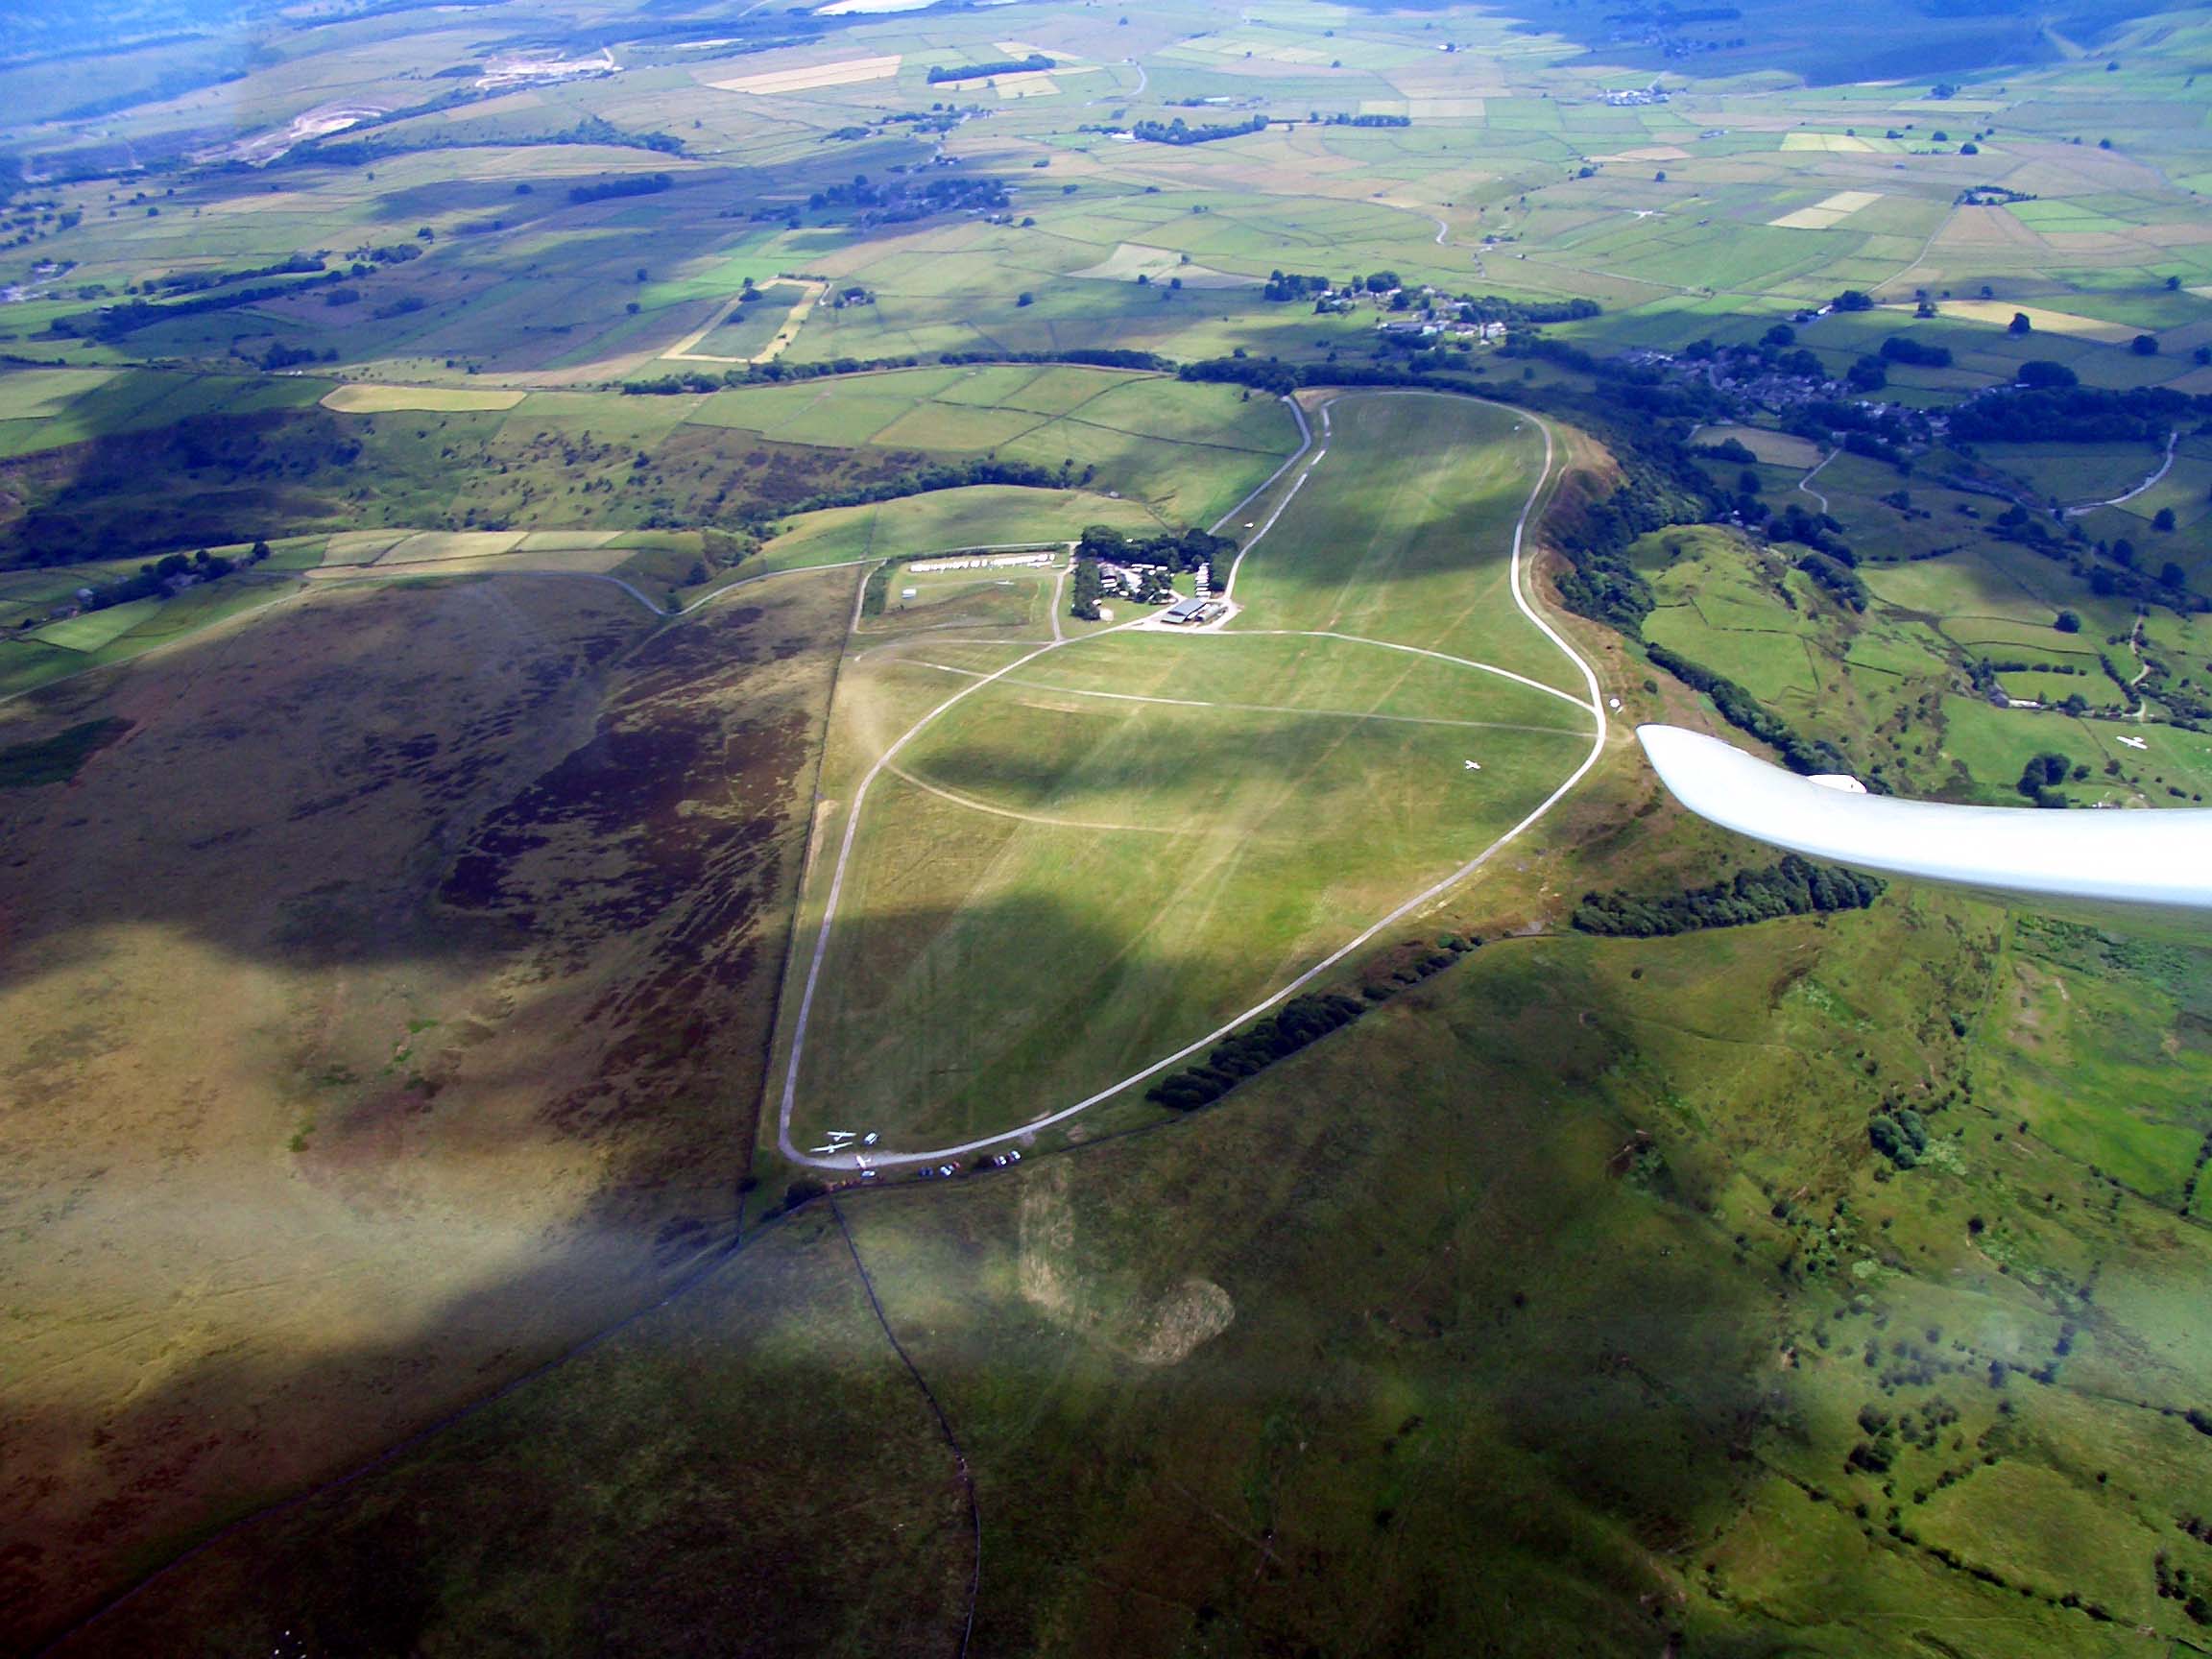 Camphill airfield seen from the North high above the ridge.